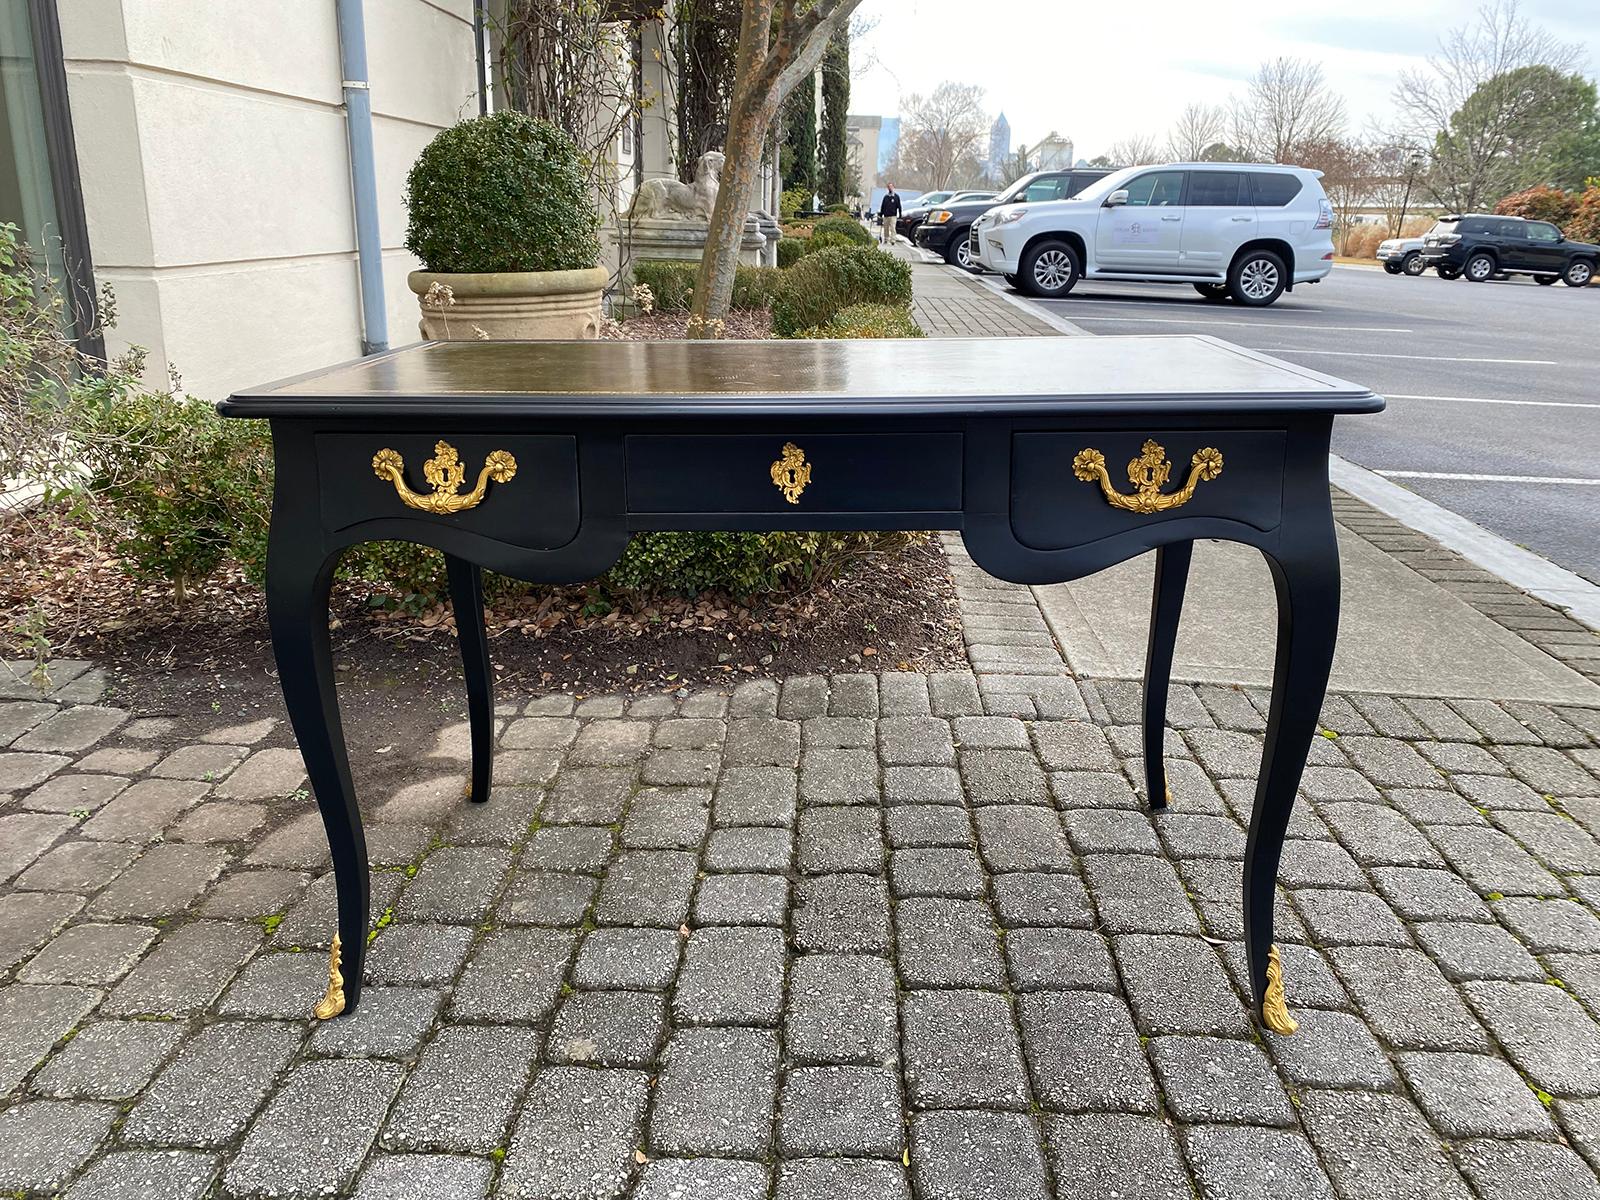 20th century Louis XV style black lacquered leather top bureau plat desk. Three drawers, two writing slides, and gilt bronze ormolu hardware. 1 key.
Measure: Apron is 24